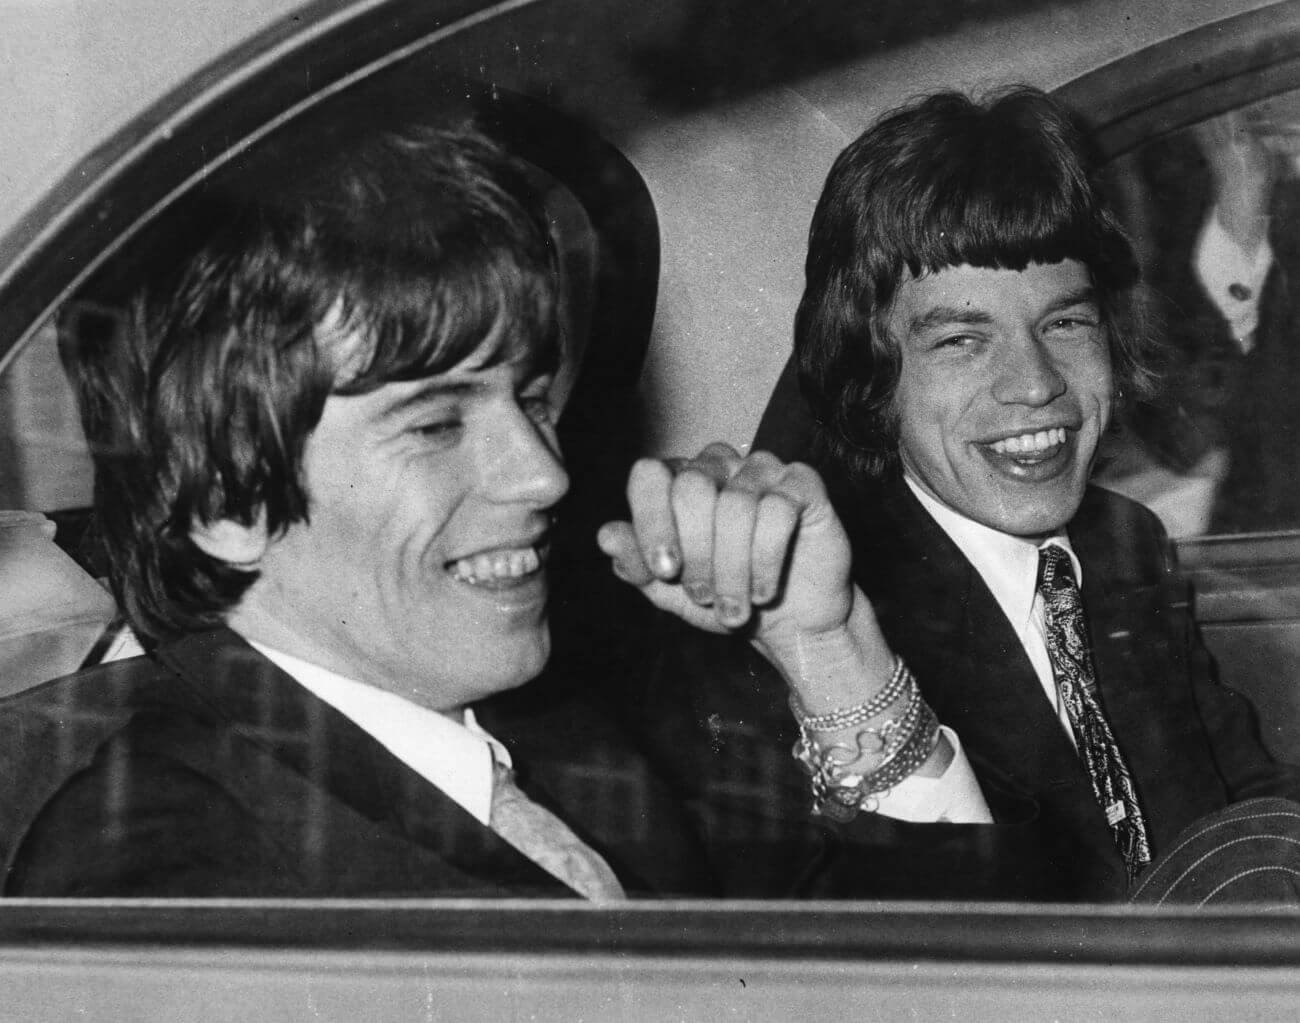 A black and white picture of Keith Richards and Mick Jagger sitting in the backseat of a car.